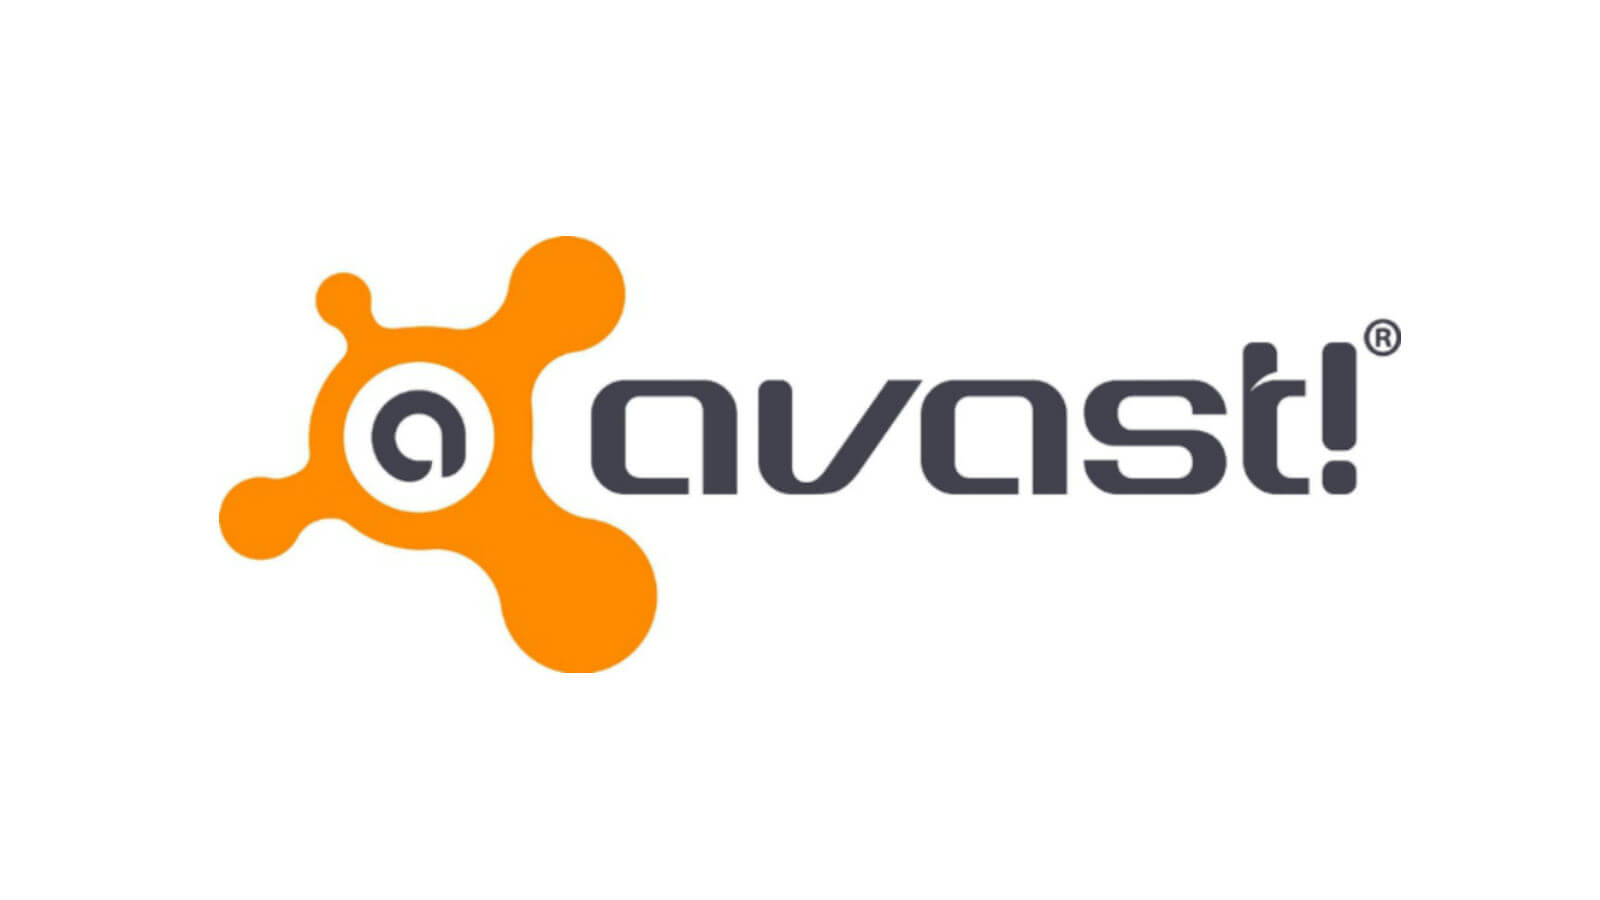 review of avast cleanup pro for mac